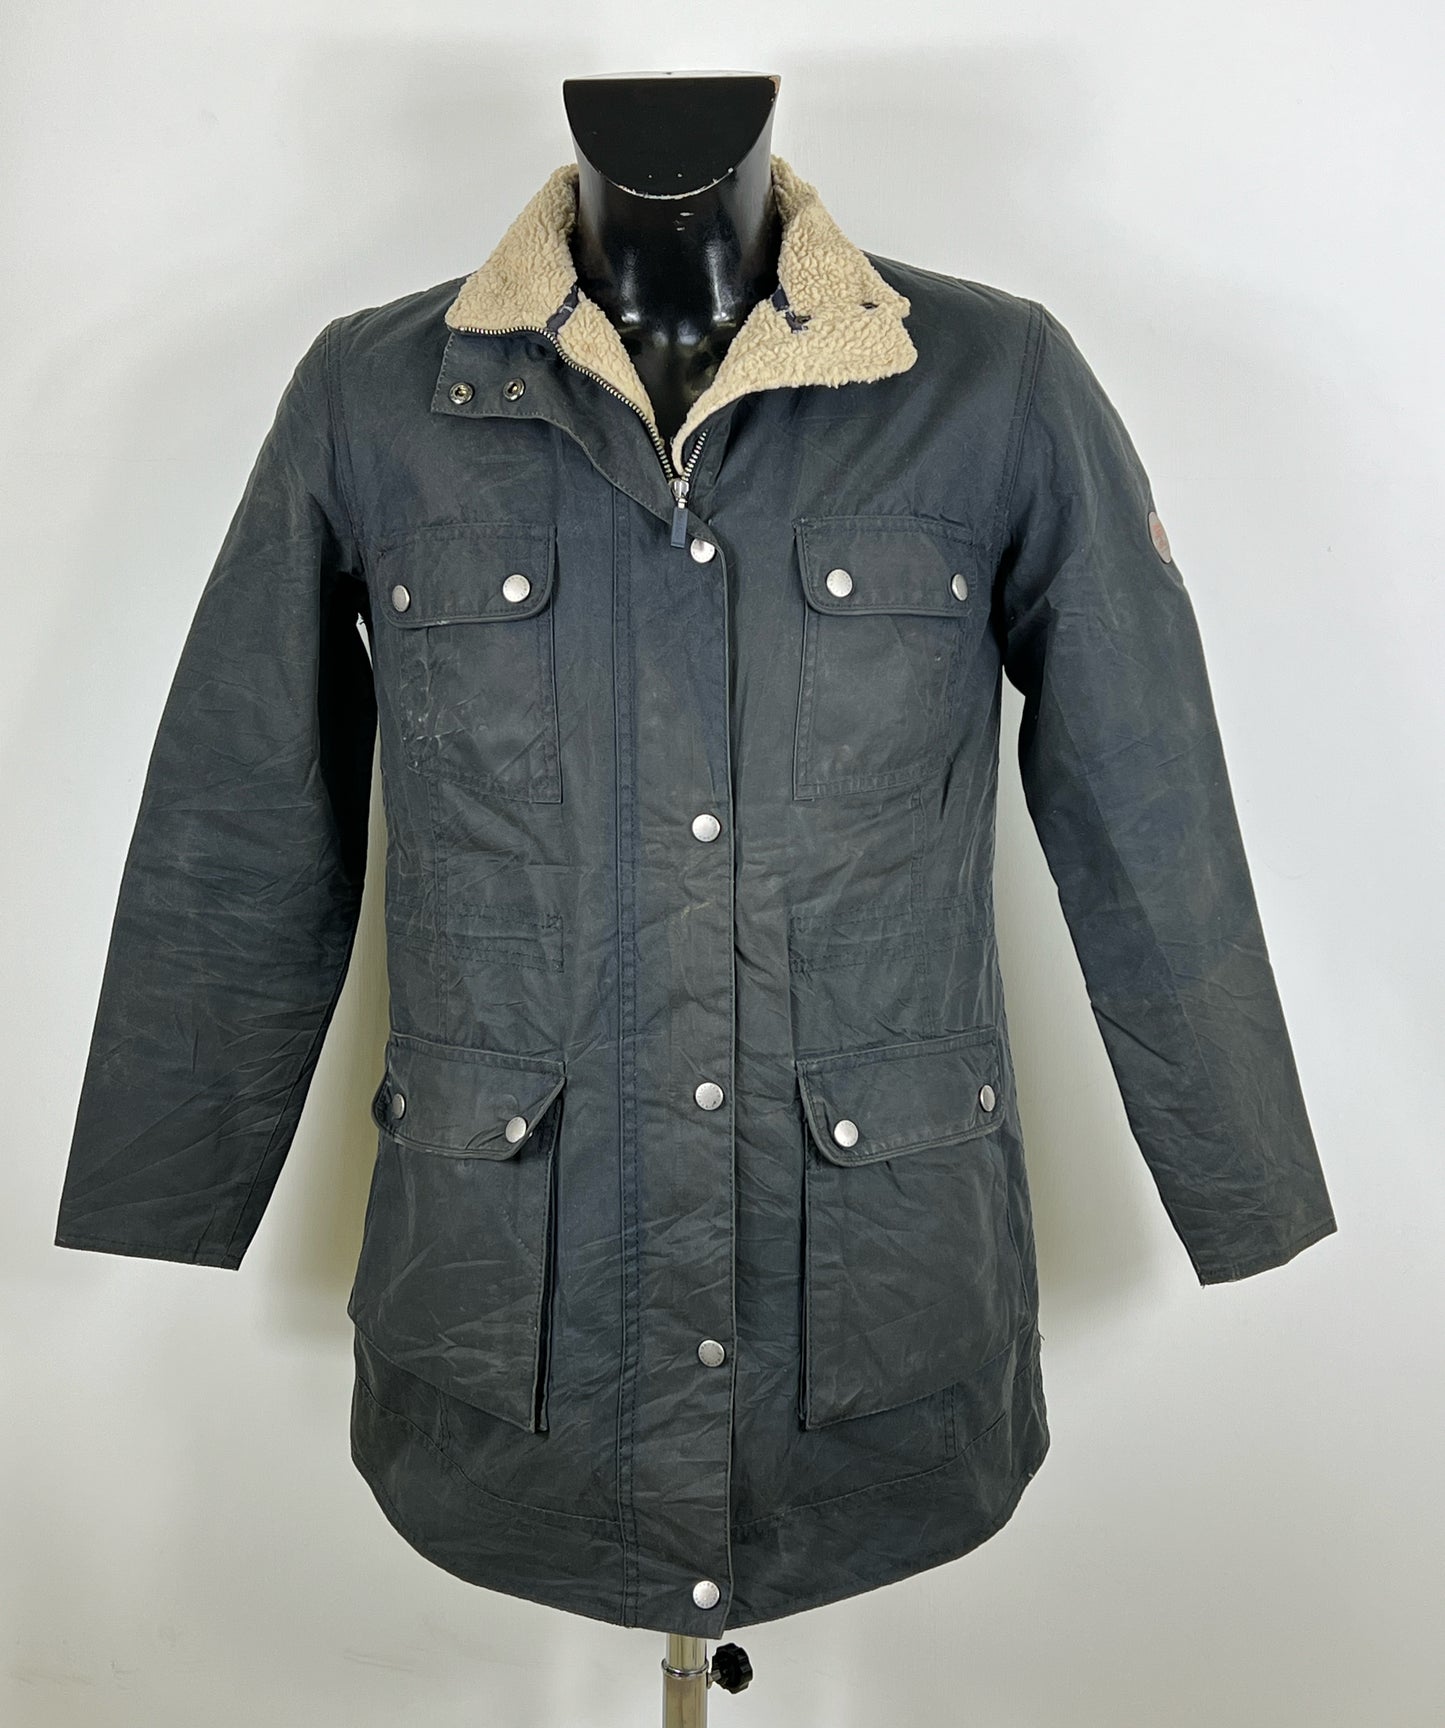 Giacca Barbour donna nera UK10 Small Invernale Black Warm Lady Wax jacket Small tg.40